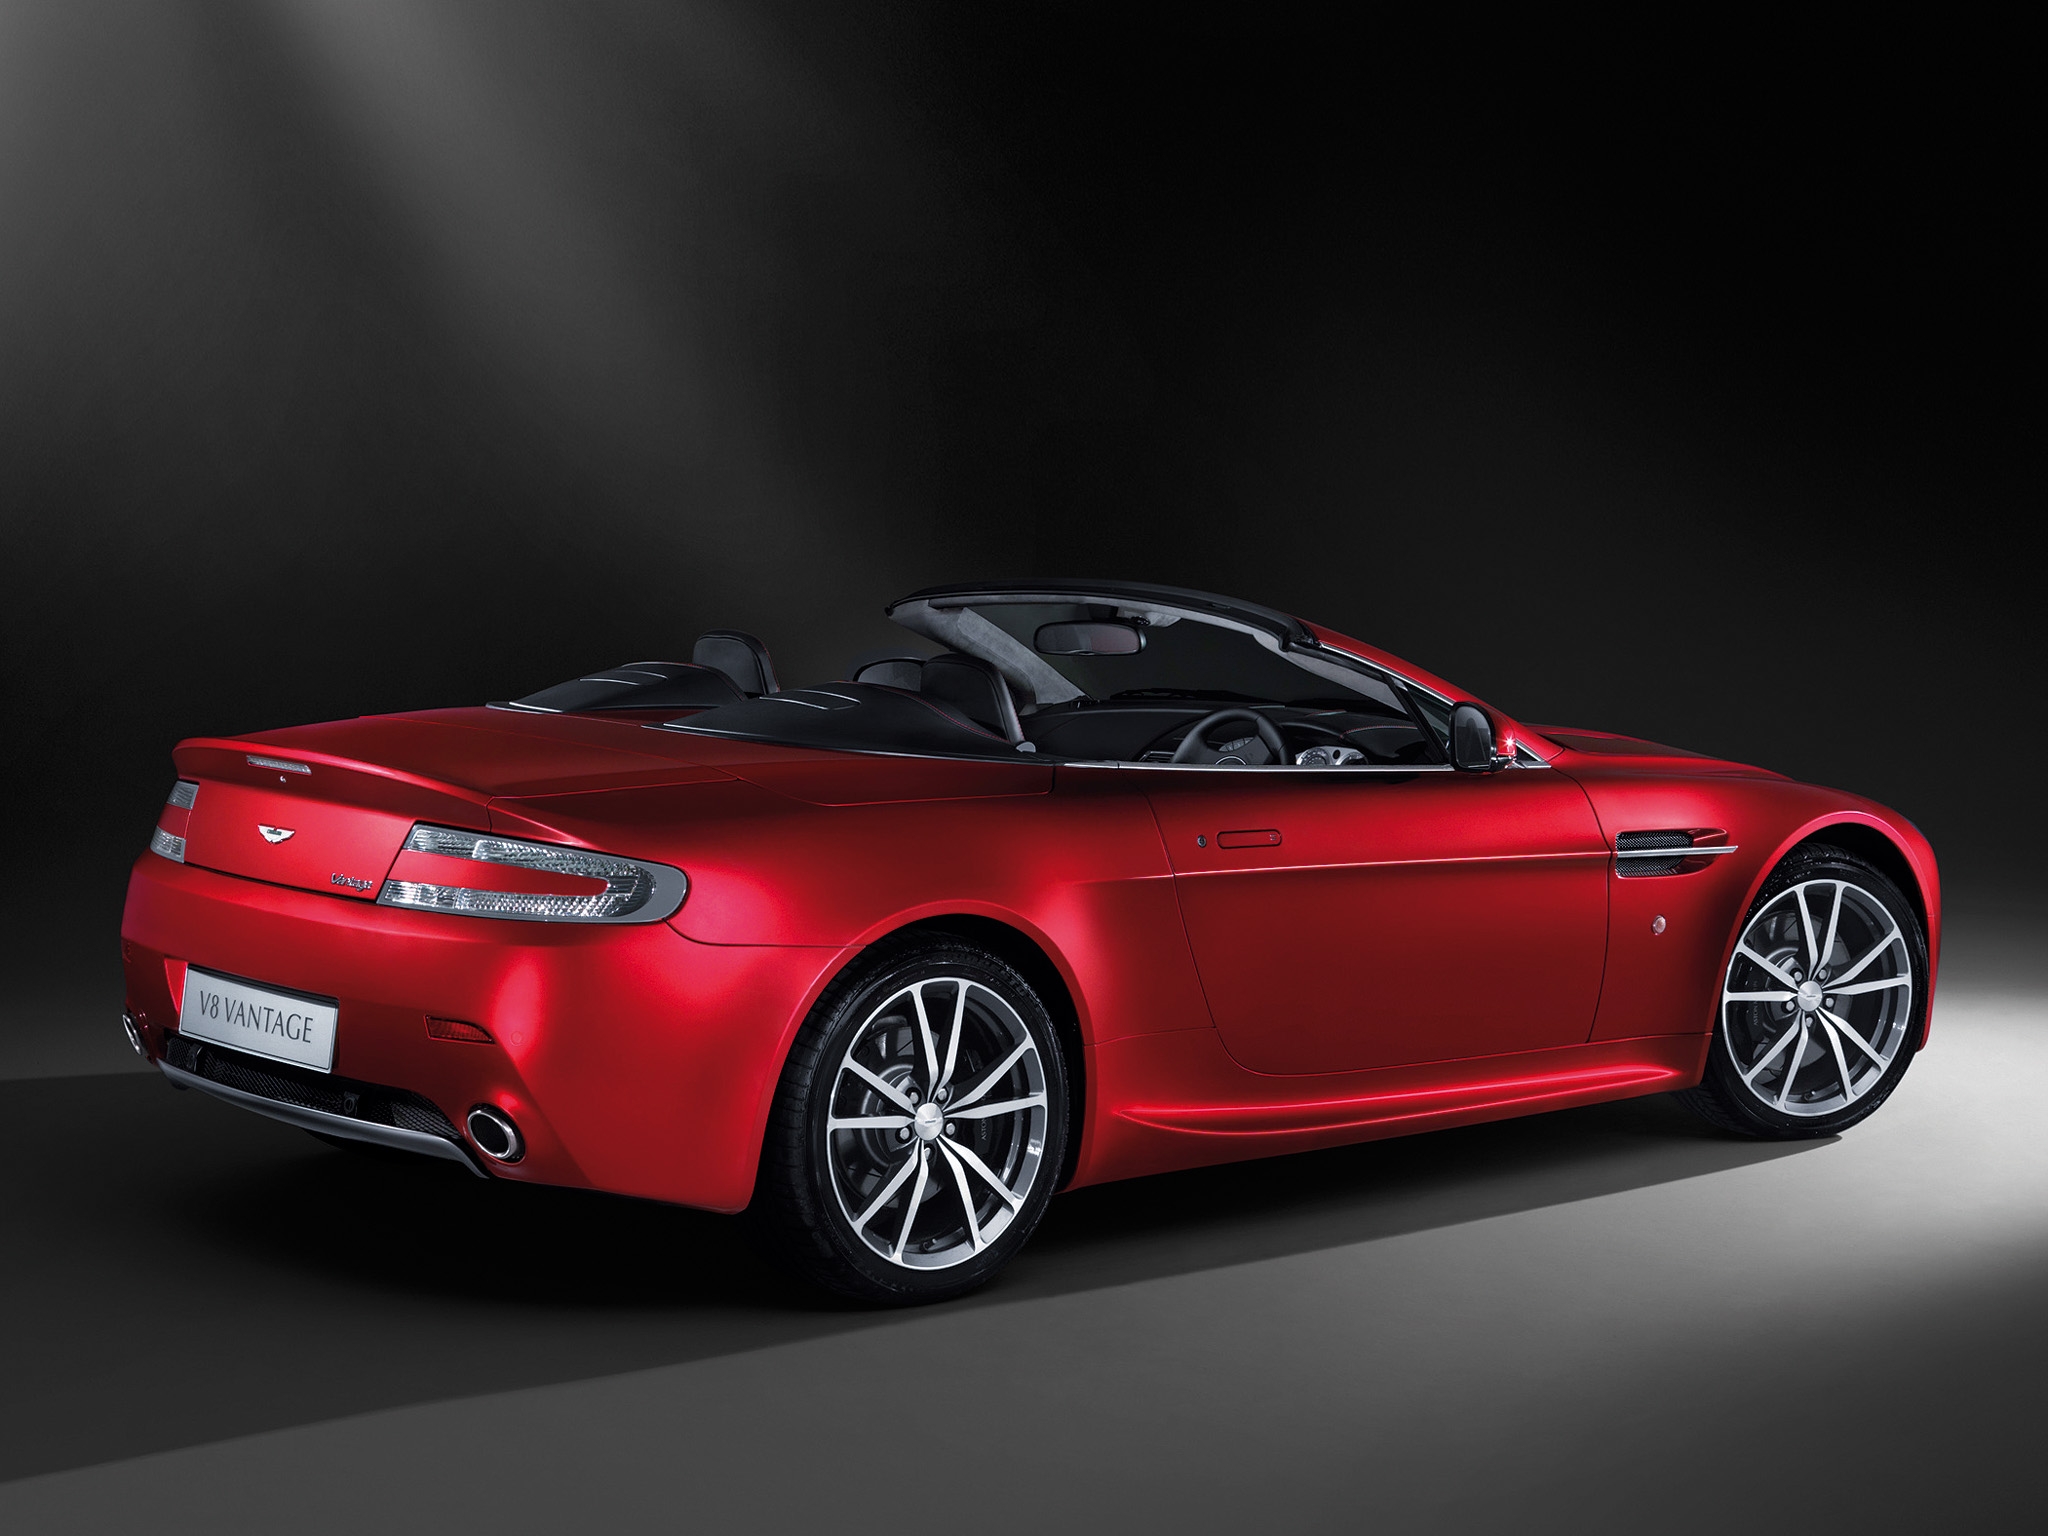 aston martin, cars, red, side view, style, cabriolet, 2008, v8, vantage HD wallpaper